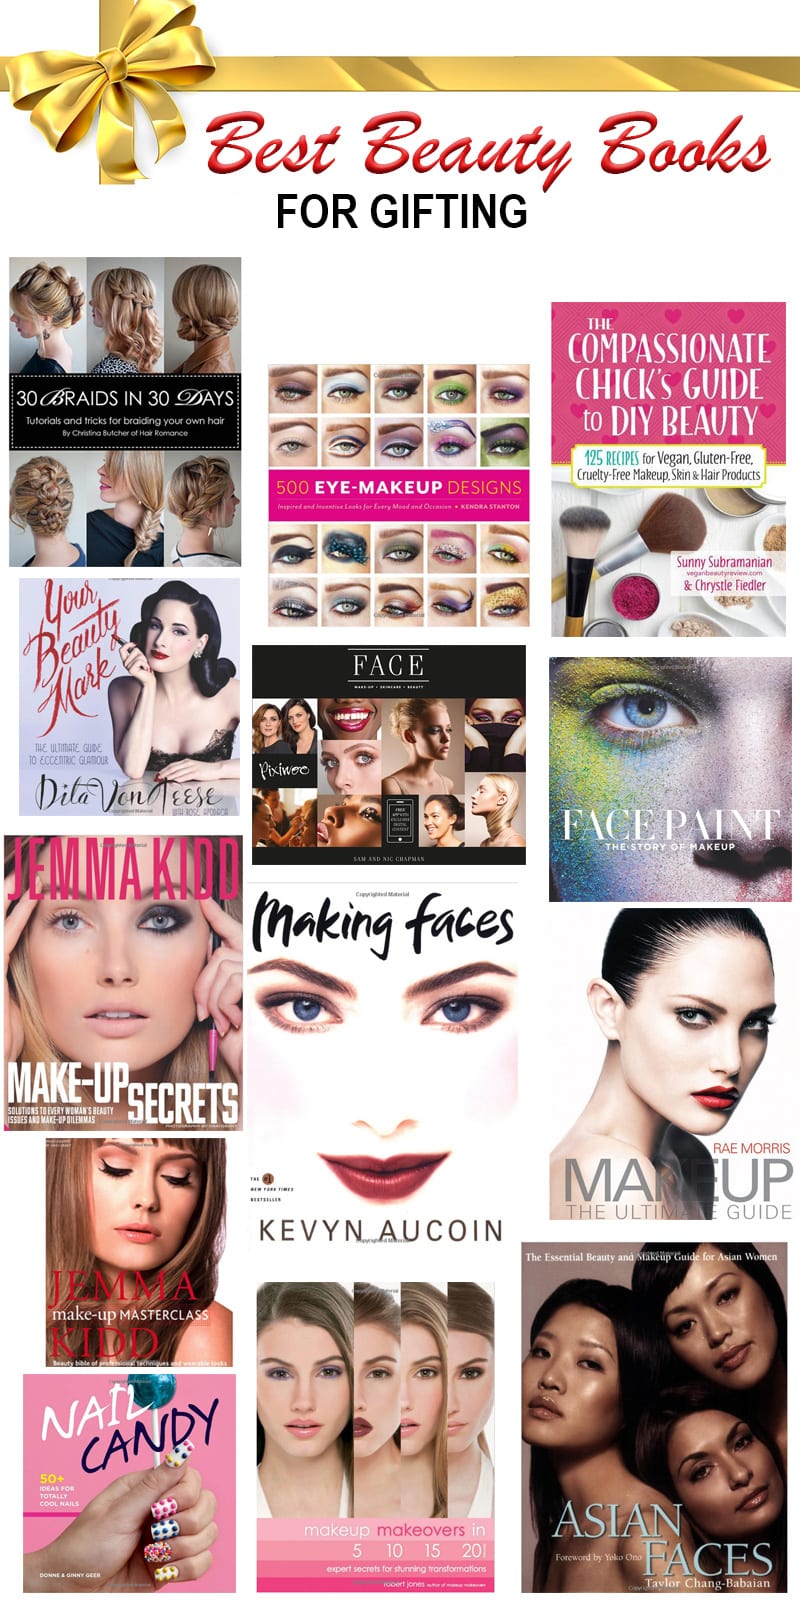 13 Best Beauty Books for Gifting